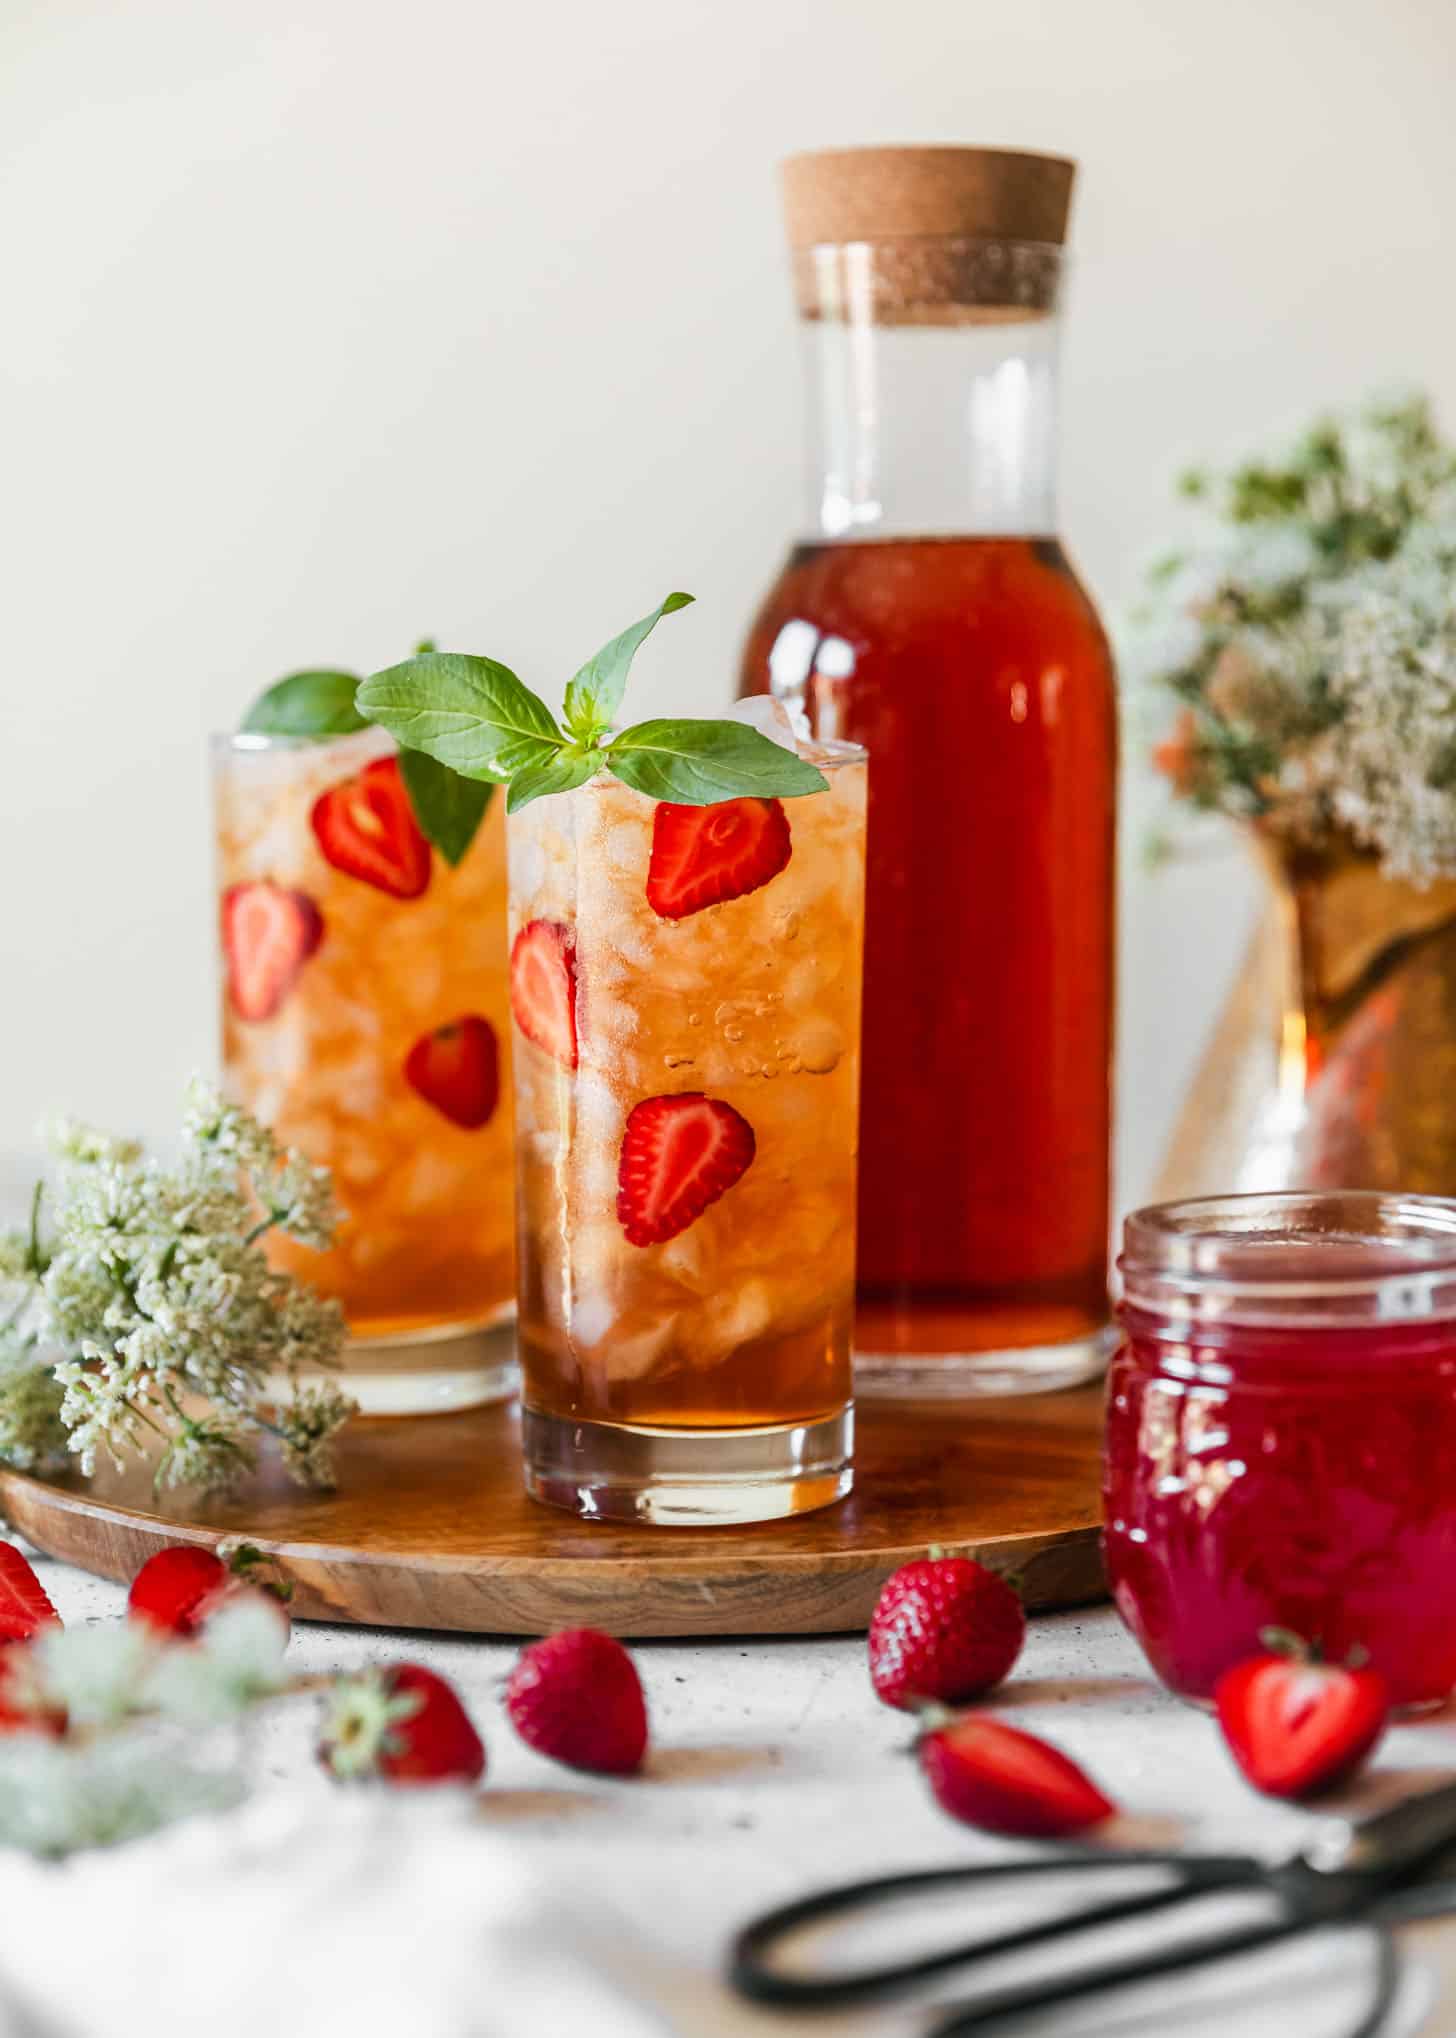 Two glasses of strawberry iced tea next to a pitcher of strawberry iced tea on a wood board next to white flowers, strawberries, a jar of strawberry syrup, and a gold teapot with a white background.